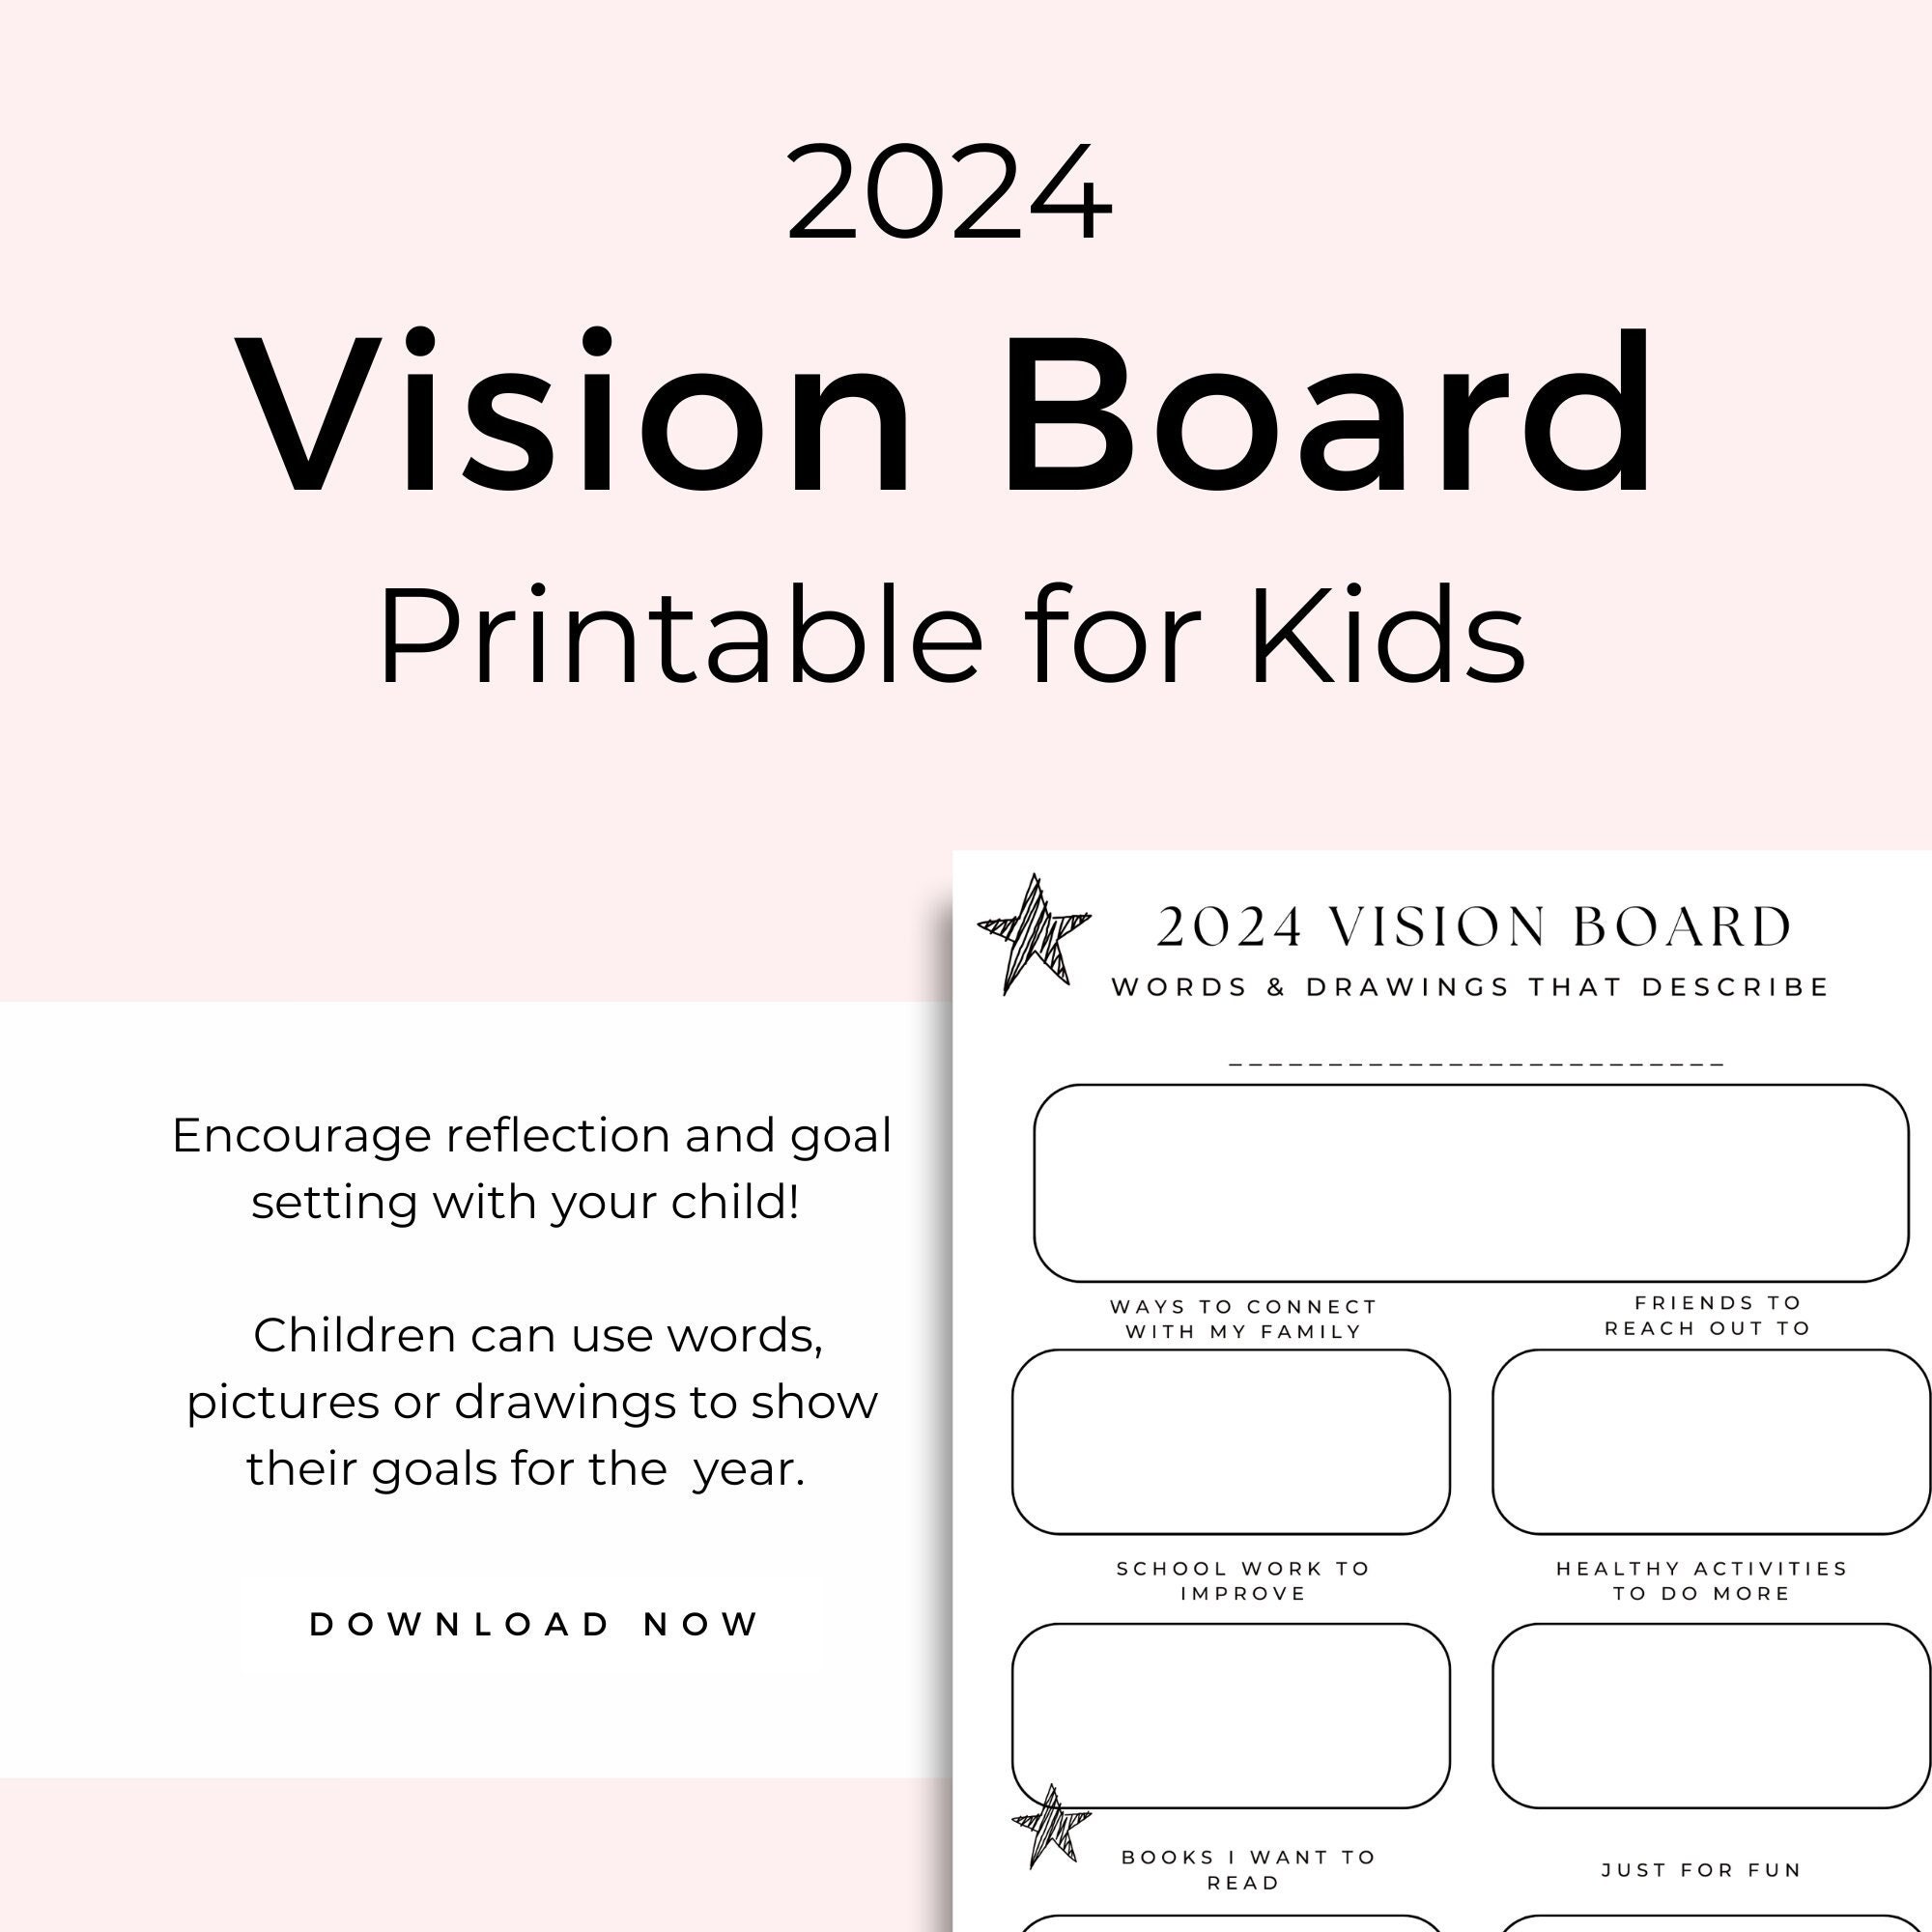 Vision Board Printable for Kids, Home Learning Activity, Kids Printable Vision  Board, Kids Planner Page, Kids Goal Board, Black and White 2 